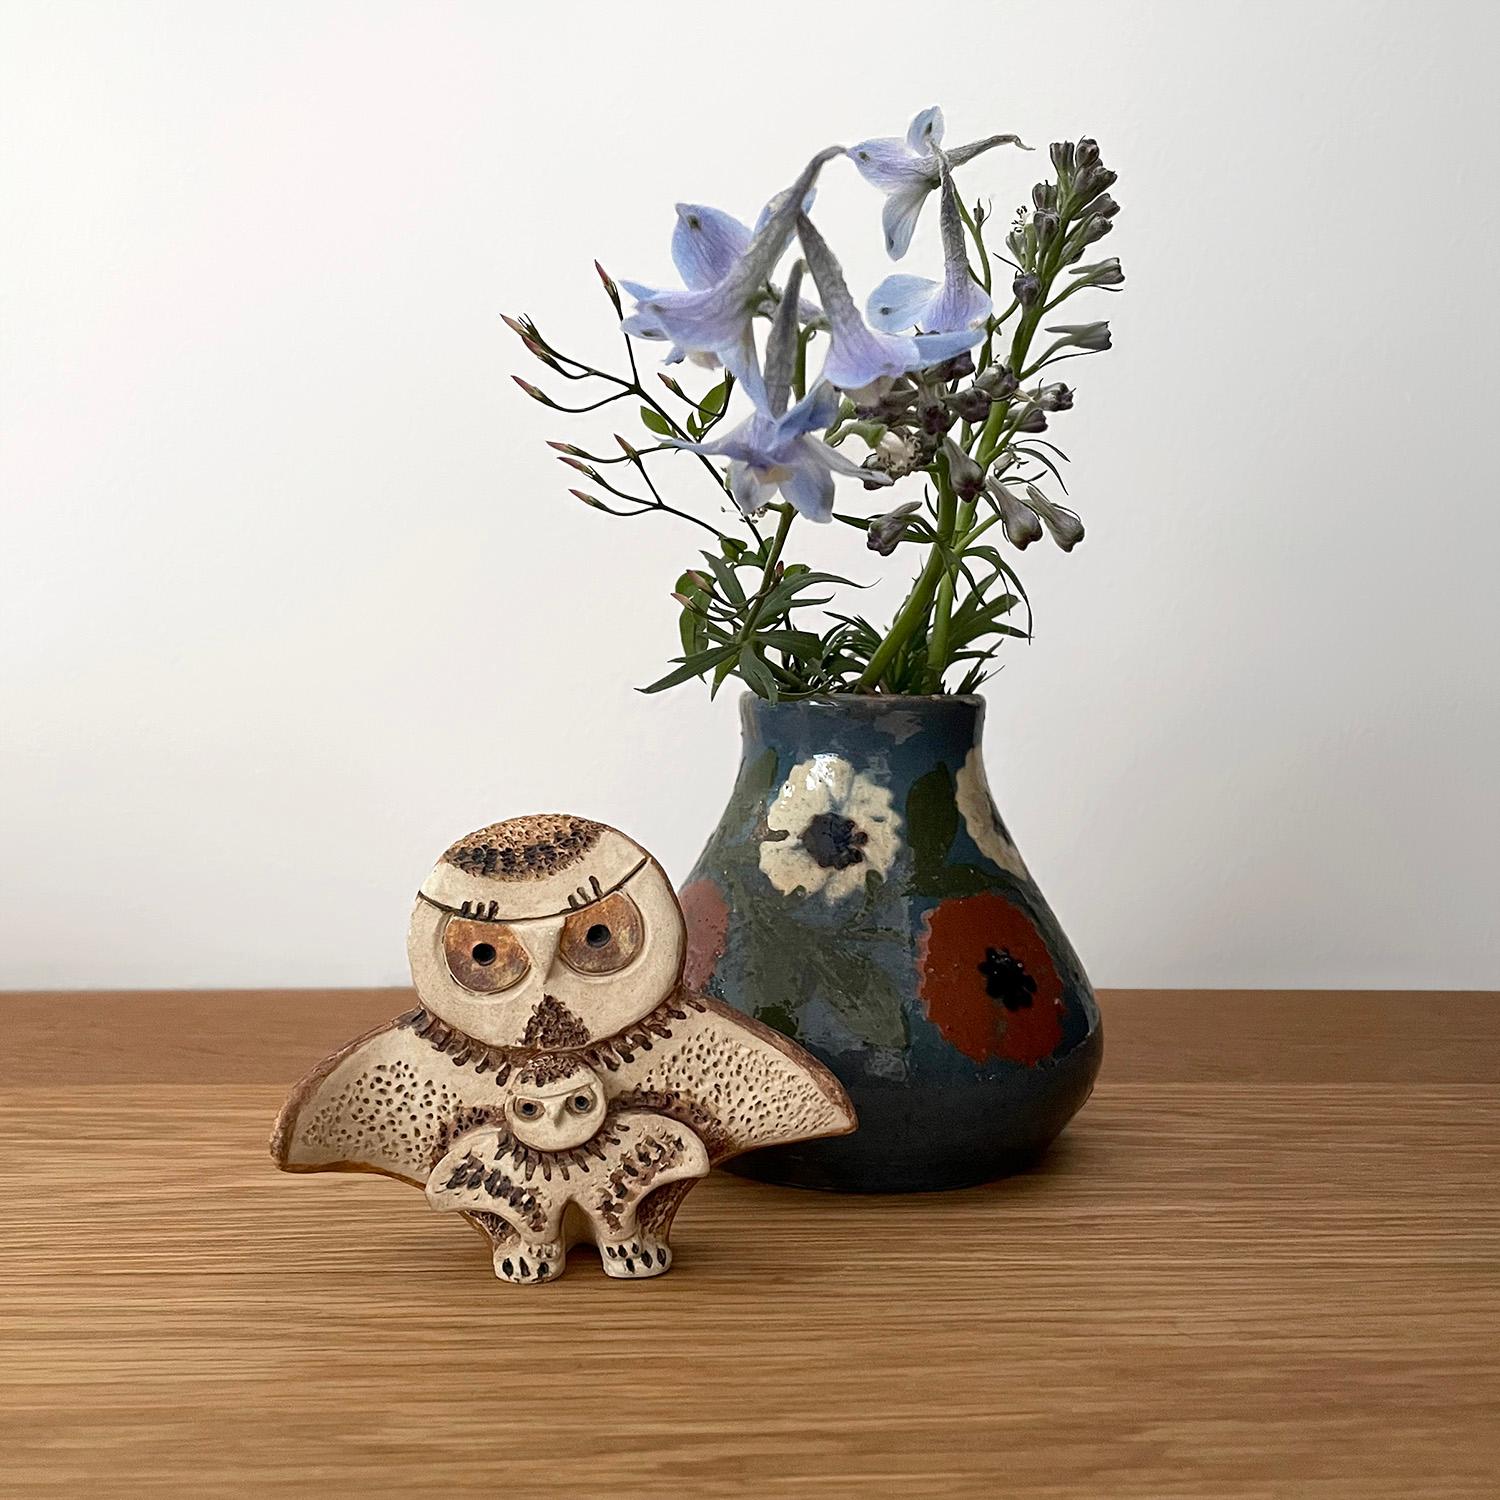 Jacky Coville petite ceramic owl sculpture 
Handcrafted artisanal piece 
Made by French ceramicist Jacky Coville
Beautifully sculpted neutral toned ceramic stoneware 
Decorated with etched marking details
Perfect present for the strigiformesphile in